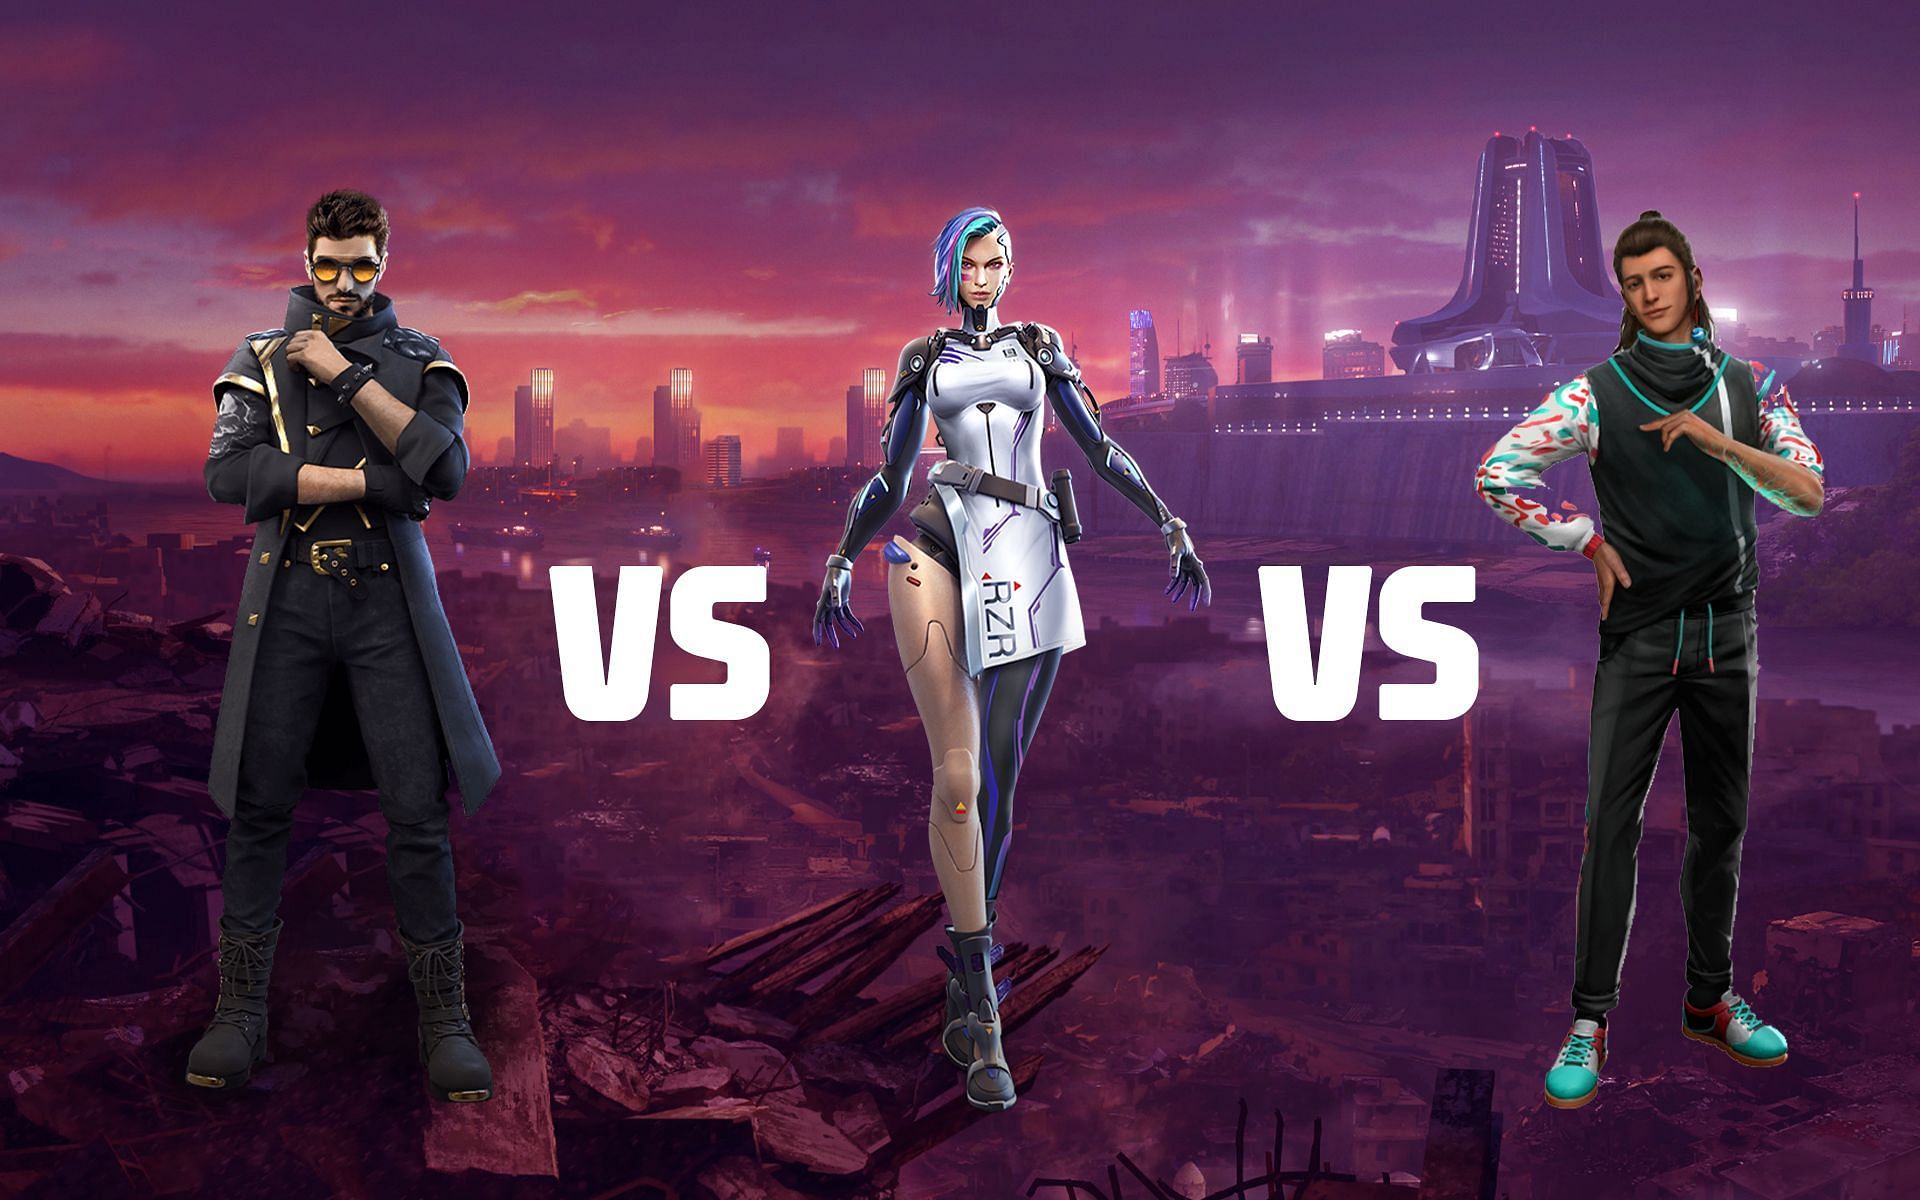 Alok vs A124 vs Otho: Which Free Fire MAX character is best? (Image via Sportskeeda)